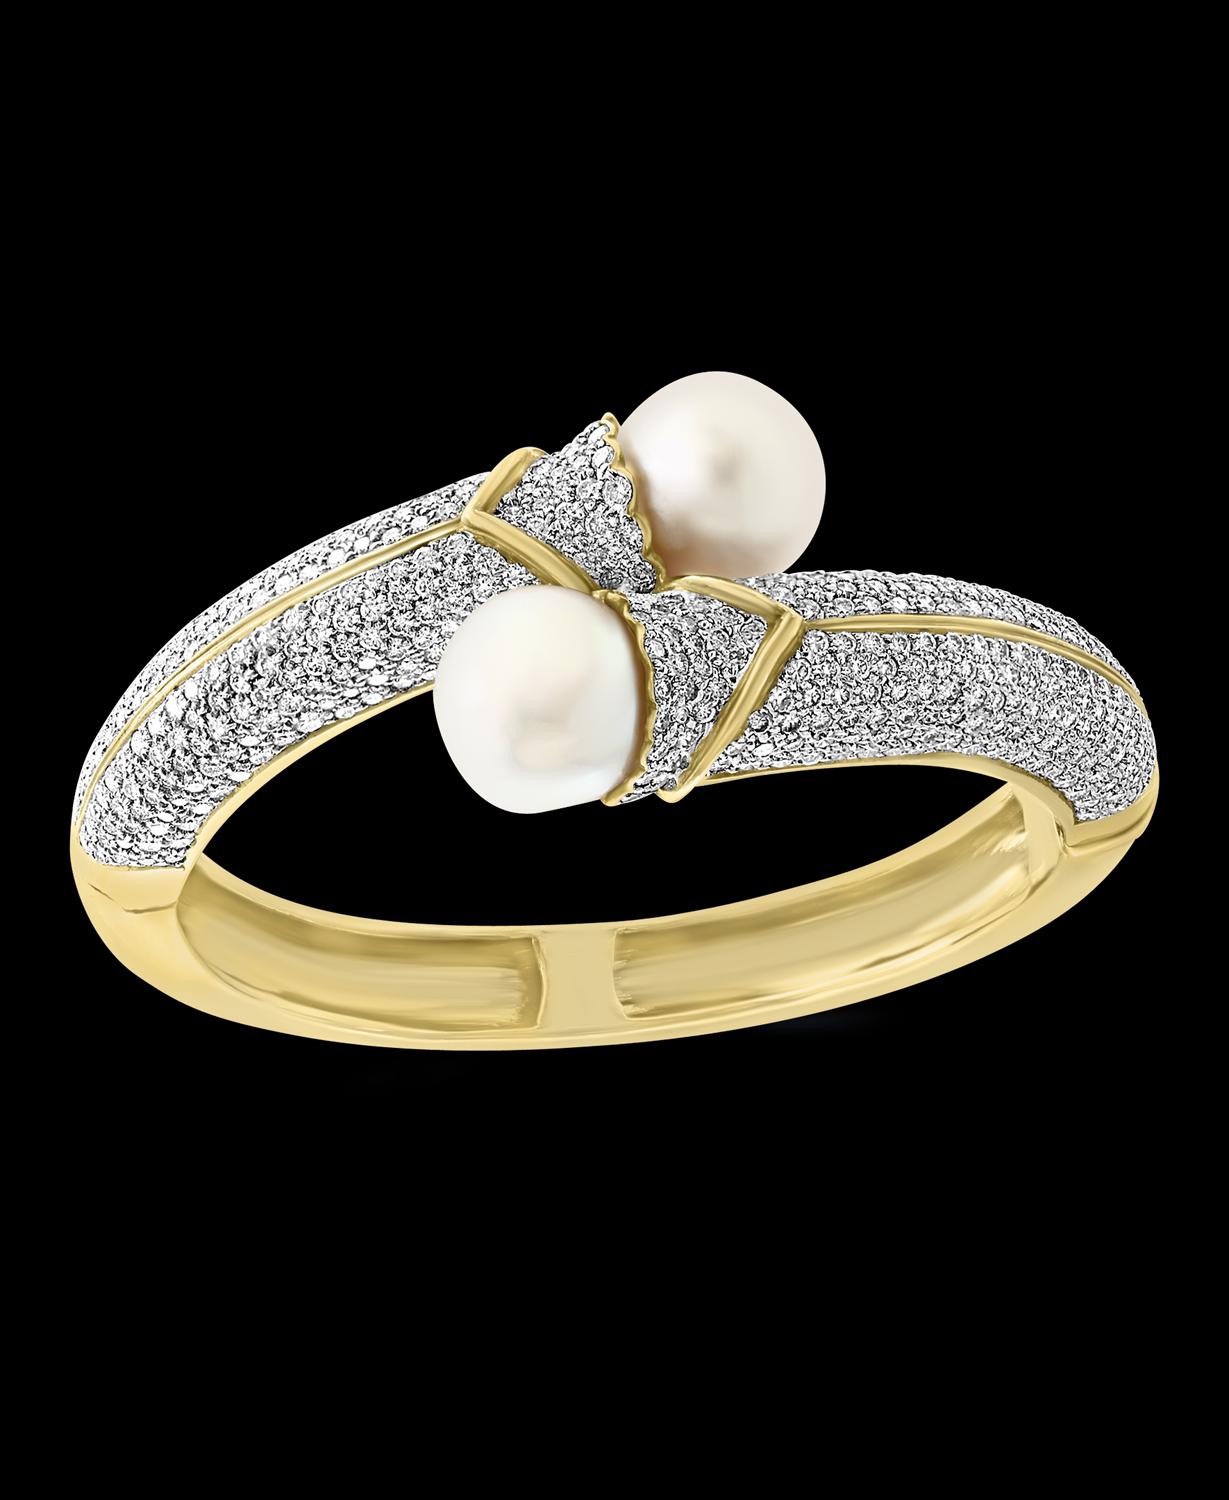 South Sea Pearl and 8 Carat Diamond Bangle in 18 Karat Yellow Gold Estate In Excellent Condition For Sale In New York, NY